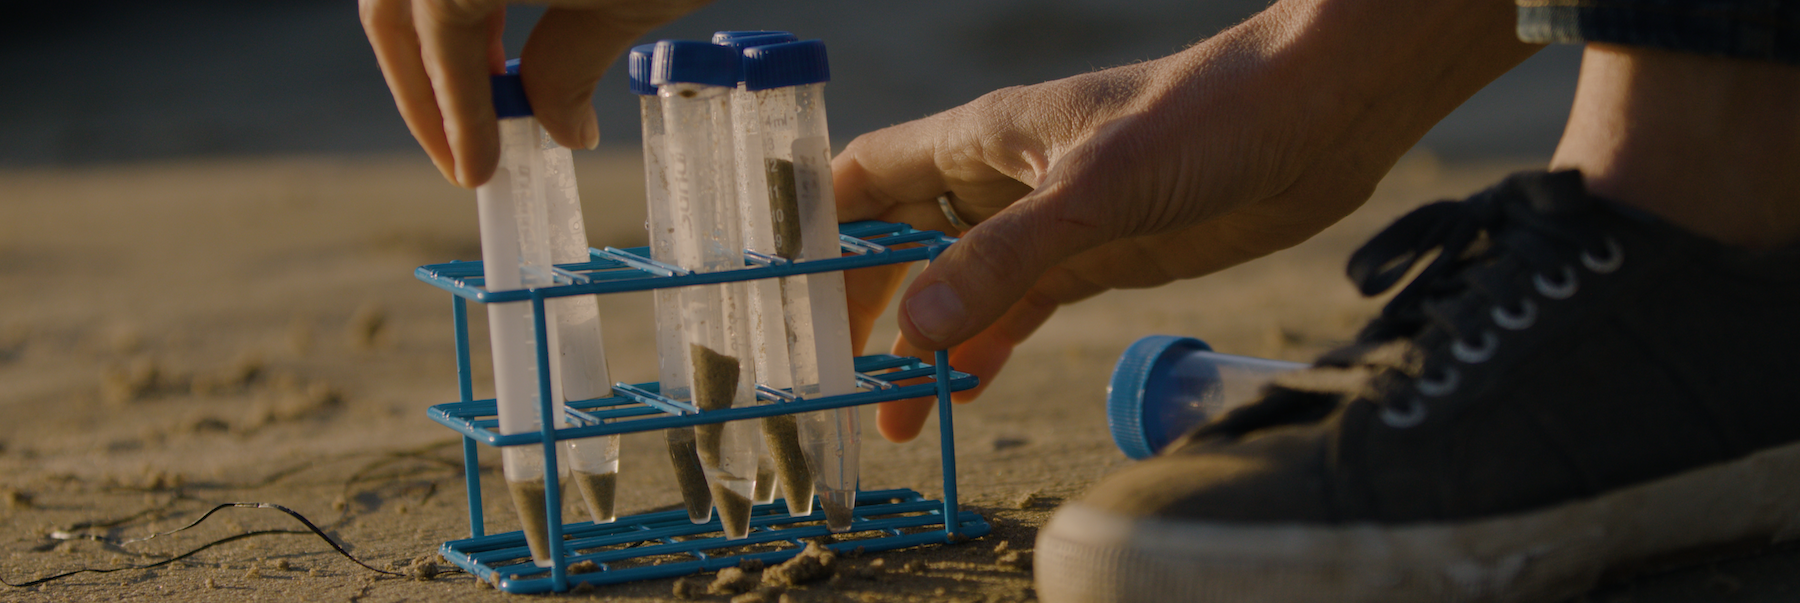 Tubes of samples being harvested on the beach